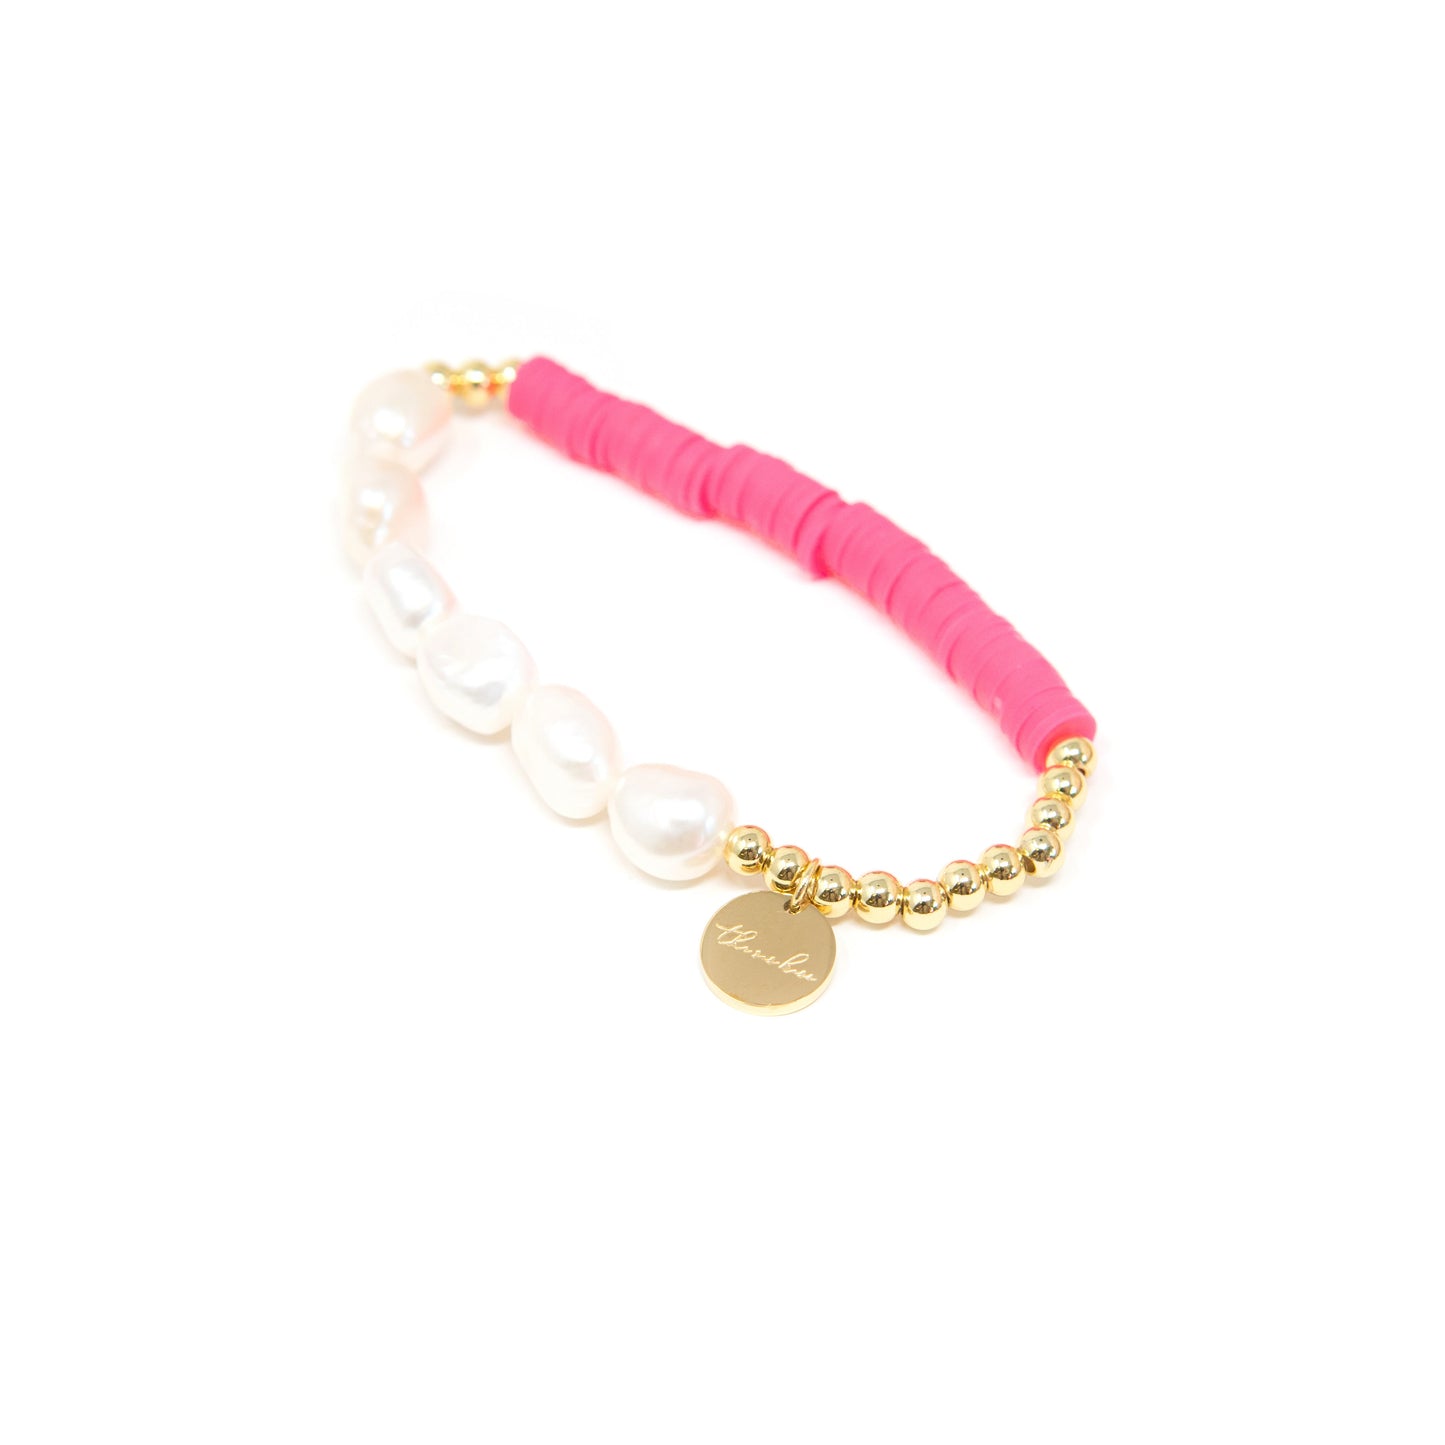 Pearl and Clay Disk Bracelets JEWELRY The Sis Kiss Pink